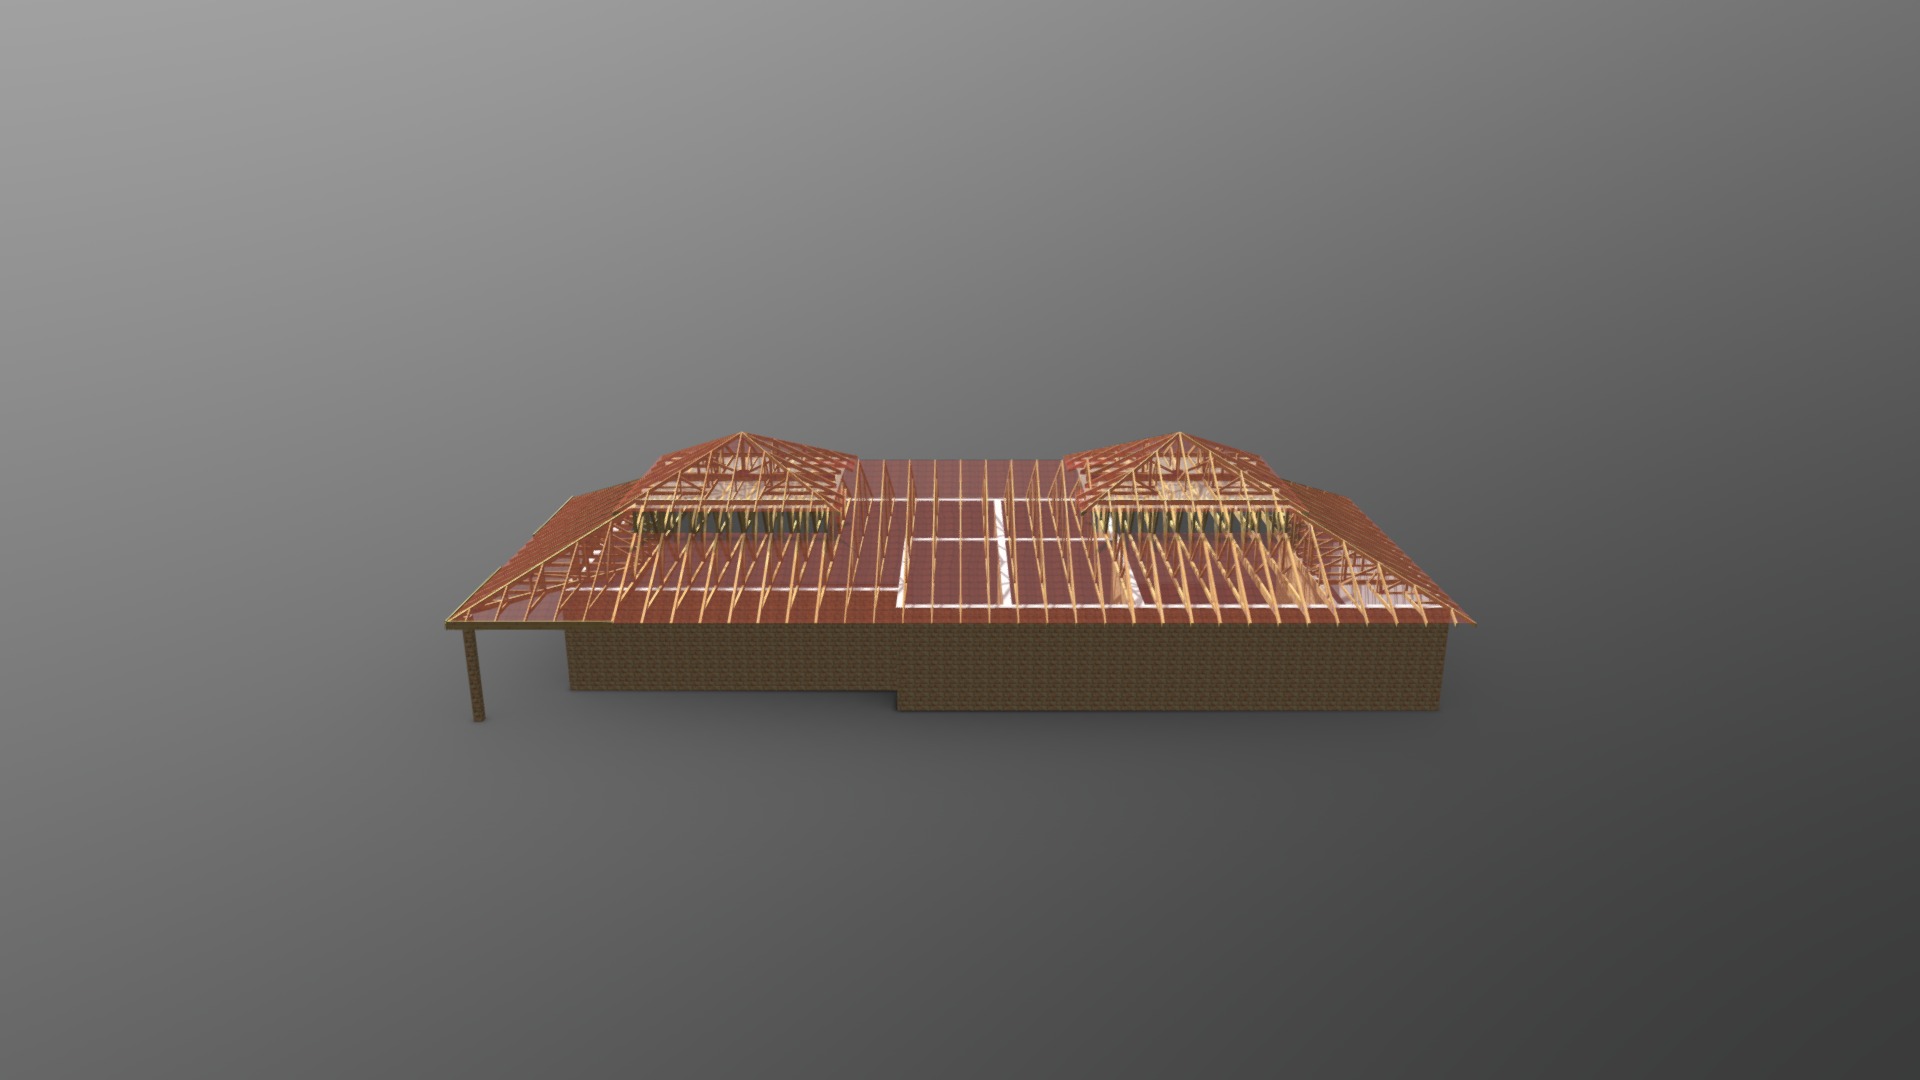 3D model 810025 32737036 - This is a 3D model of the 810025 32737036. The 3D model is about a building with a roof.